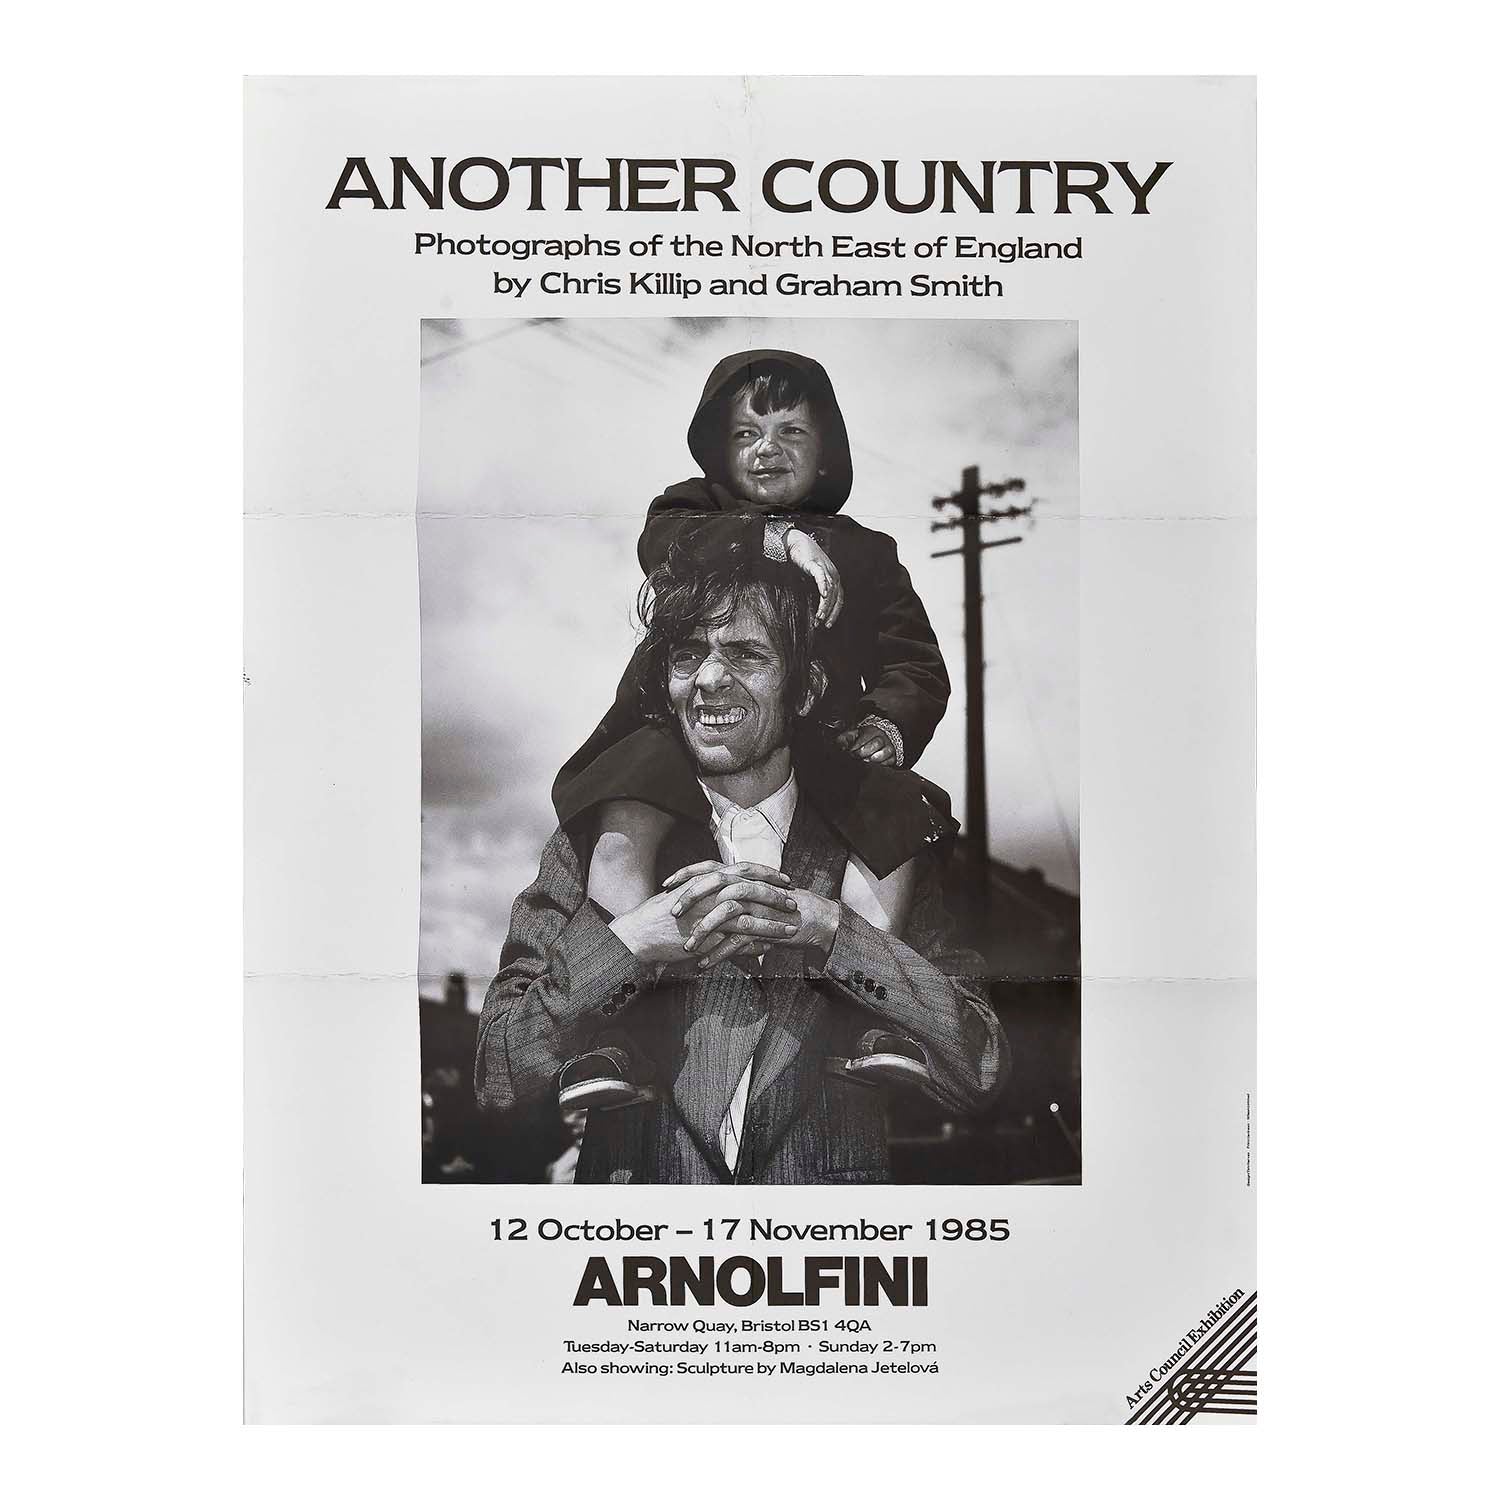 Original art exhibition poster, Another Country. Photographs of the North East of England by Chris Killip and Graham Smith, designed by Tim Harvey for the Arnolfini Gallery, 1985